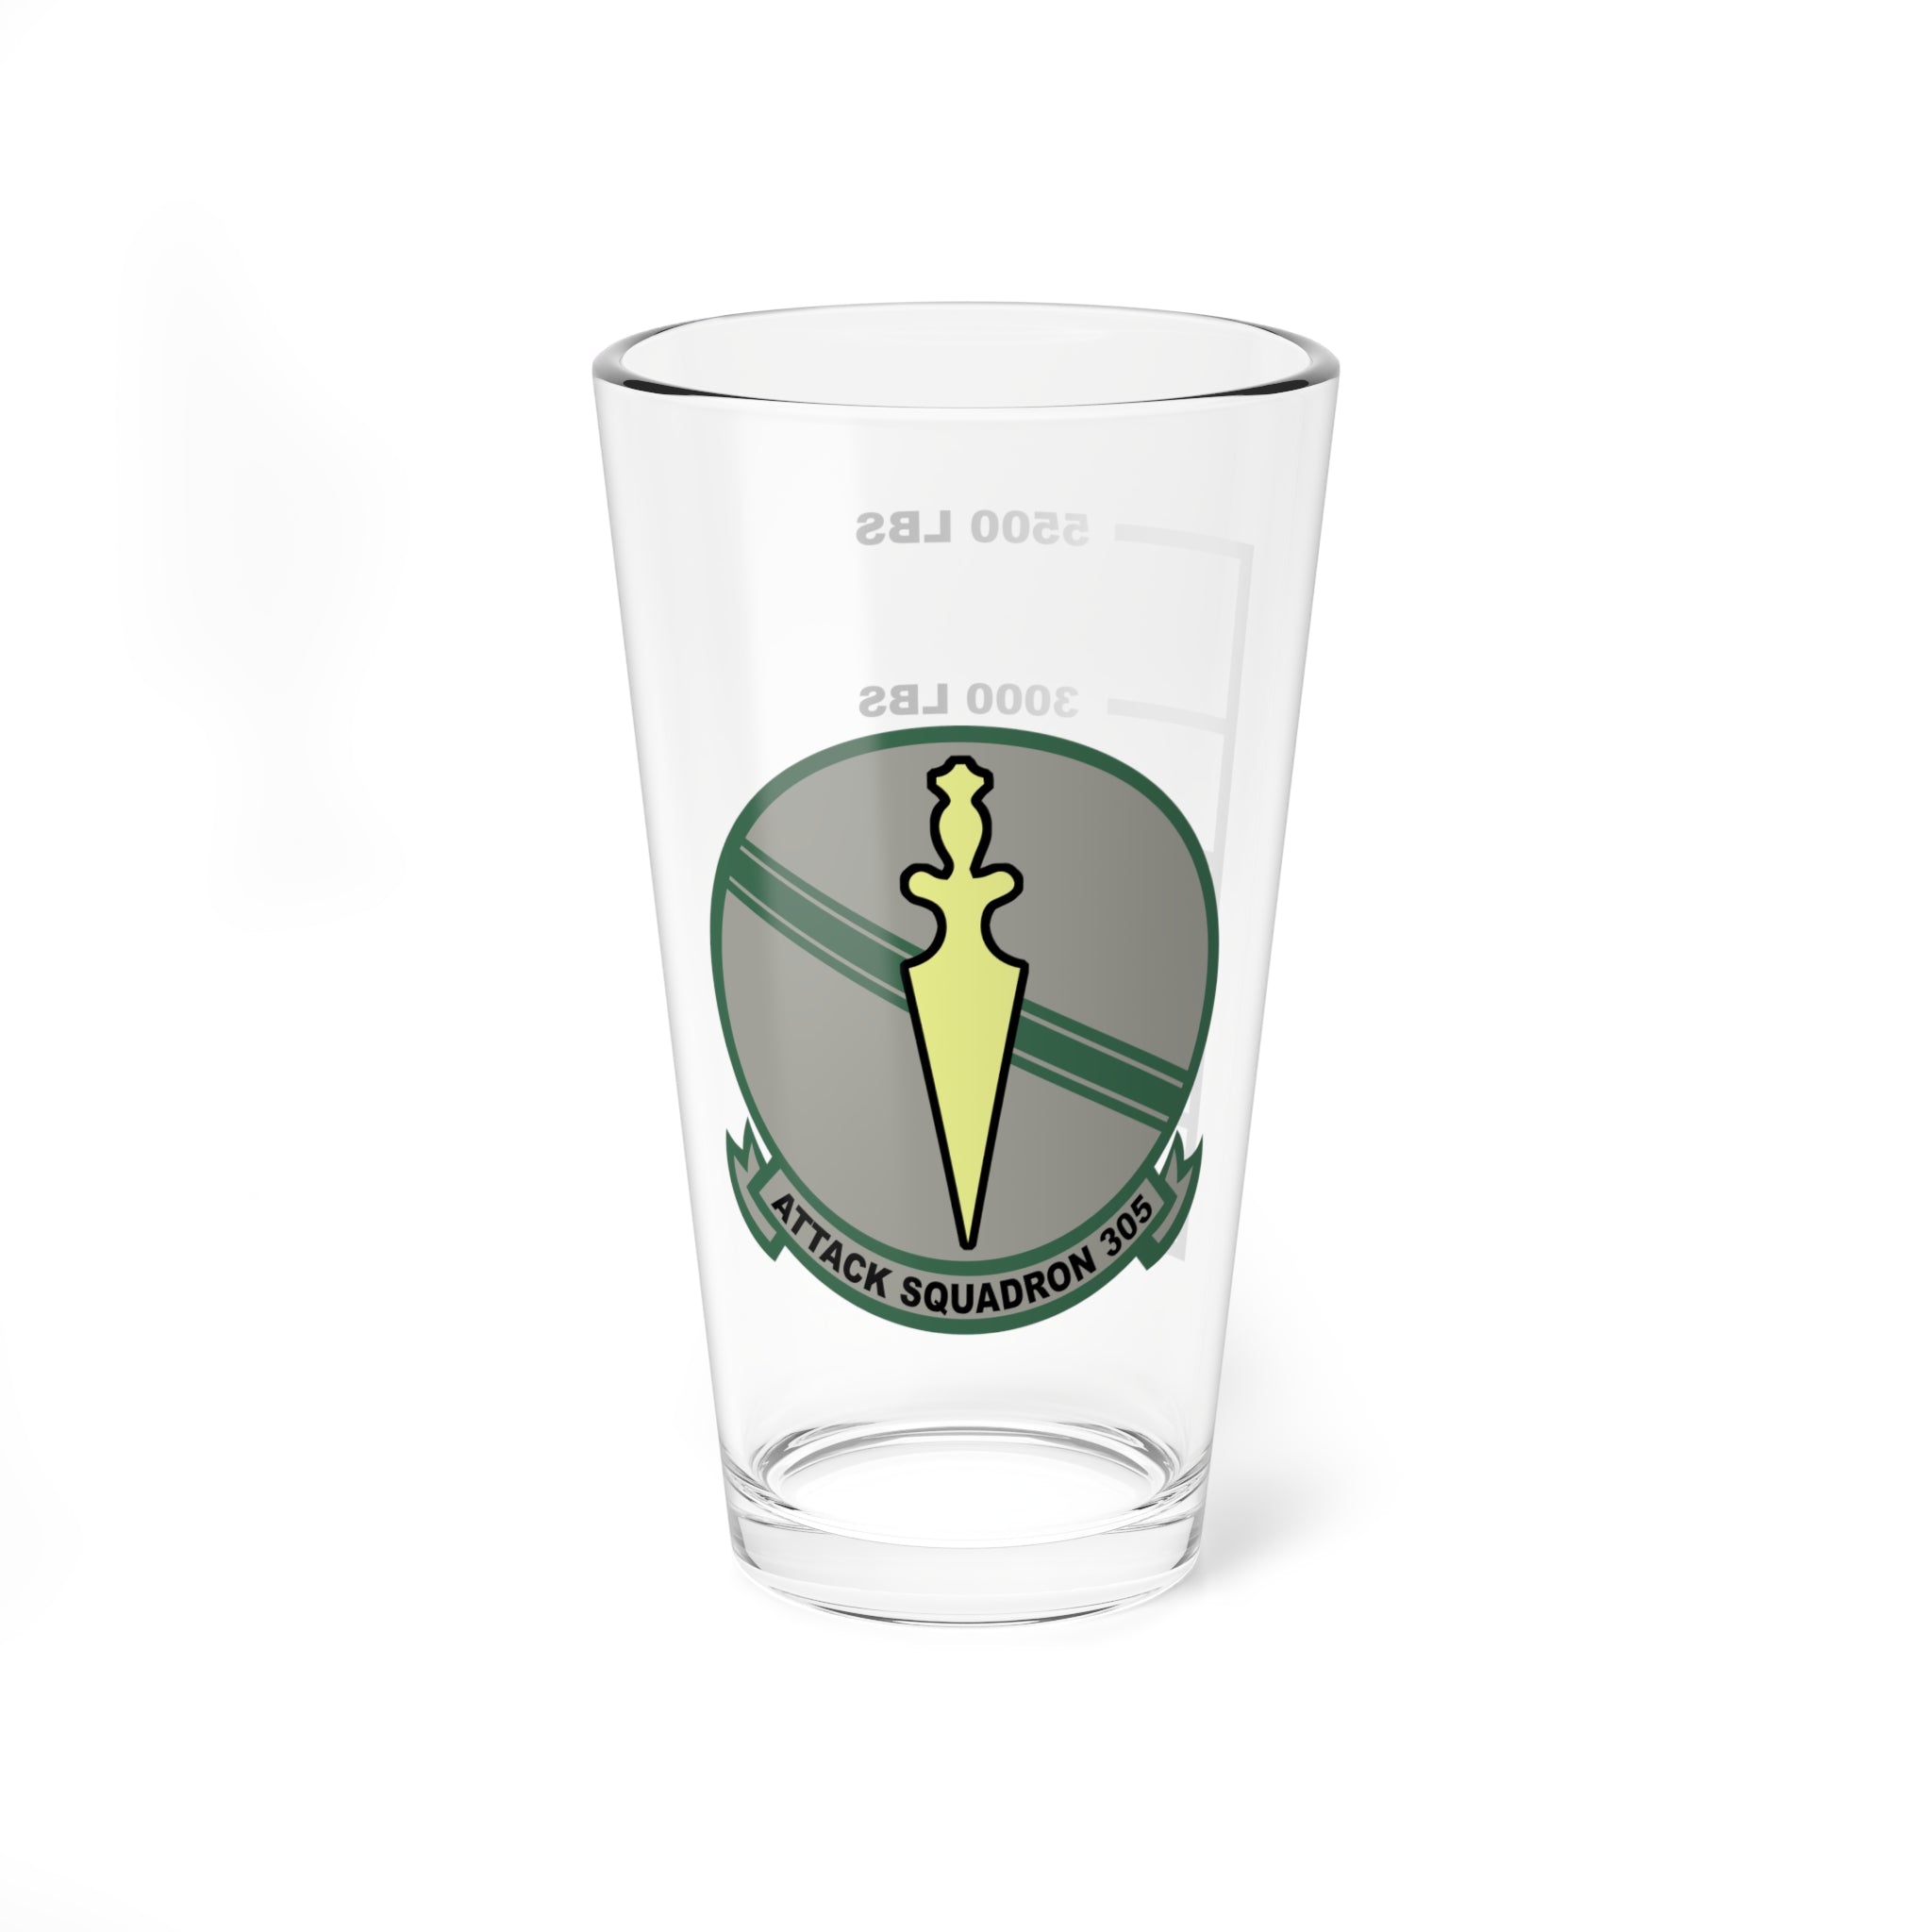 VA-305 "Hackers"  (GREEN) Fuel Low Pint Glass, US Navy Attack Squadron Flying the A-4 Skyhawk